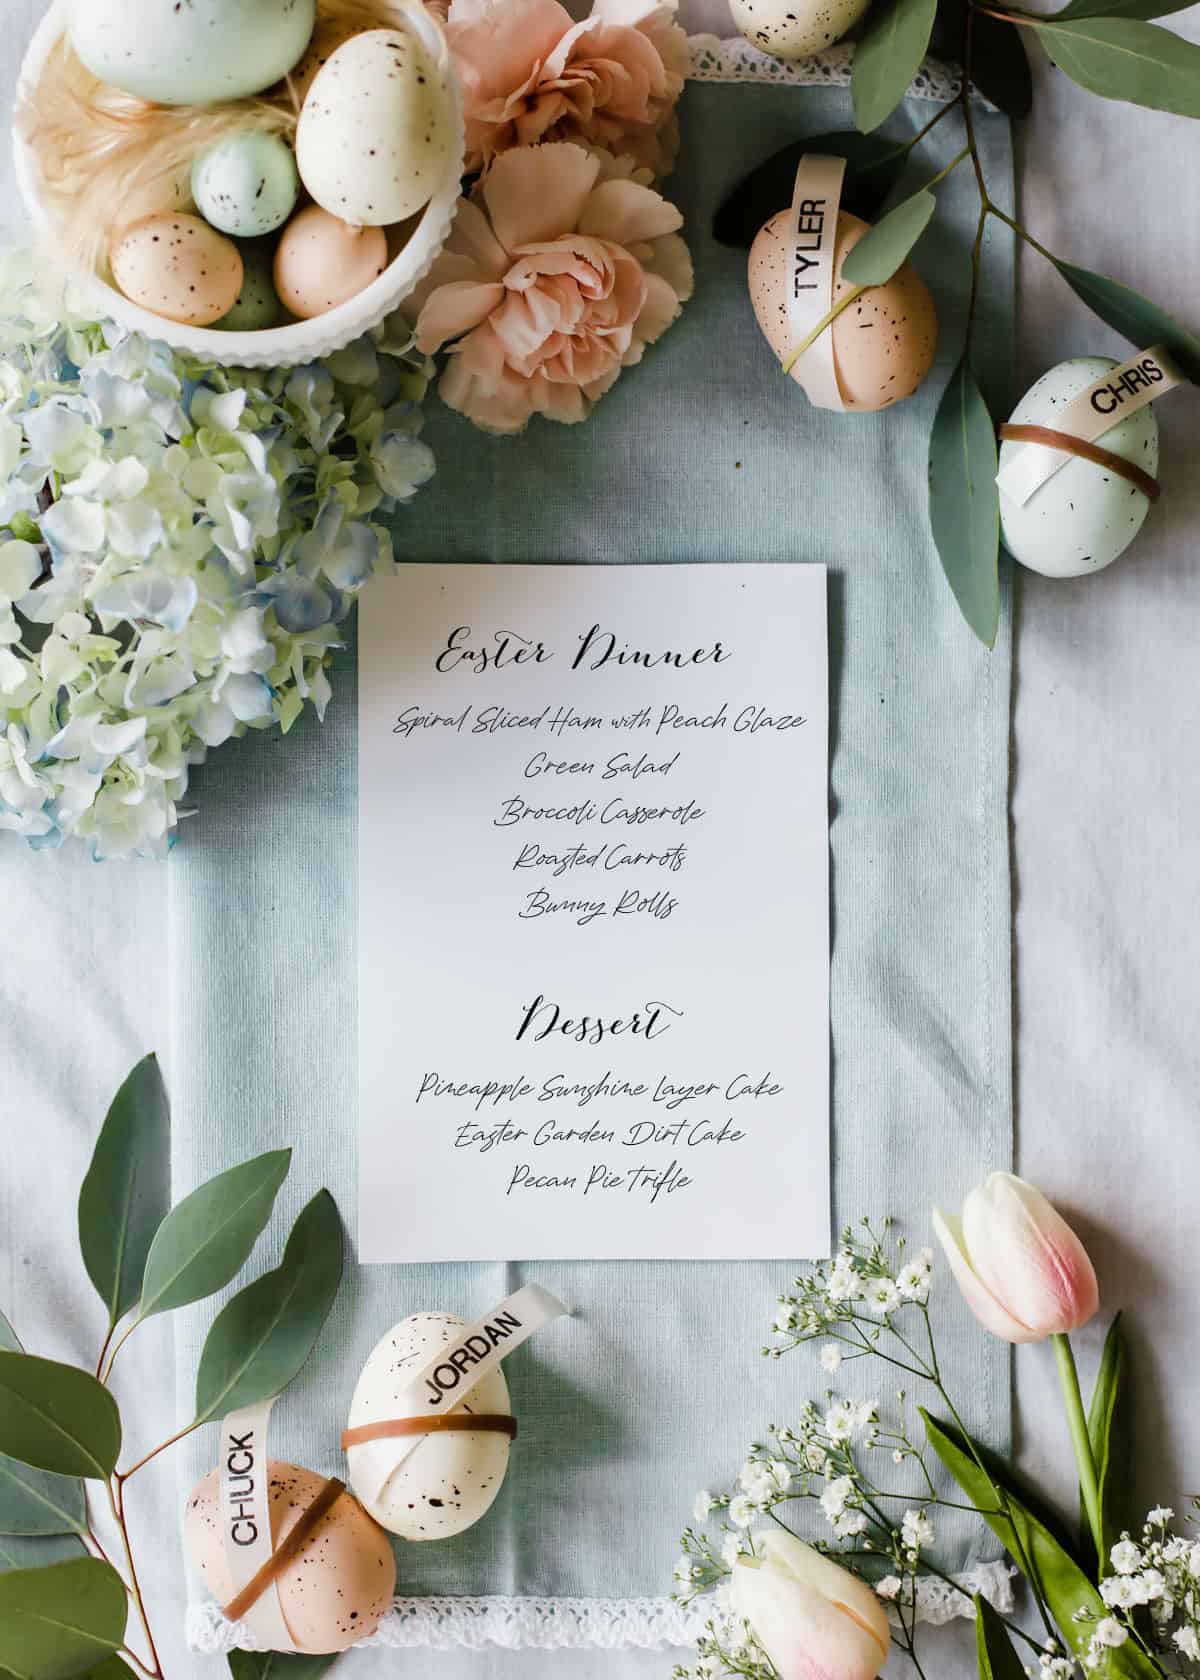 printed menu card sitting on a blue napkin surrounded by Easter eggs and fresh spring flowers.